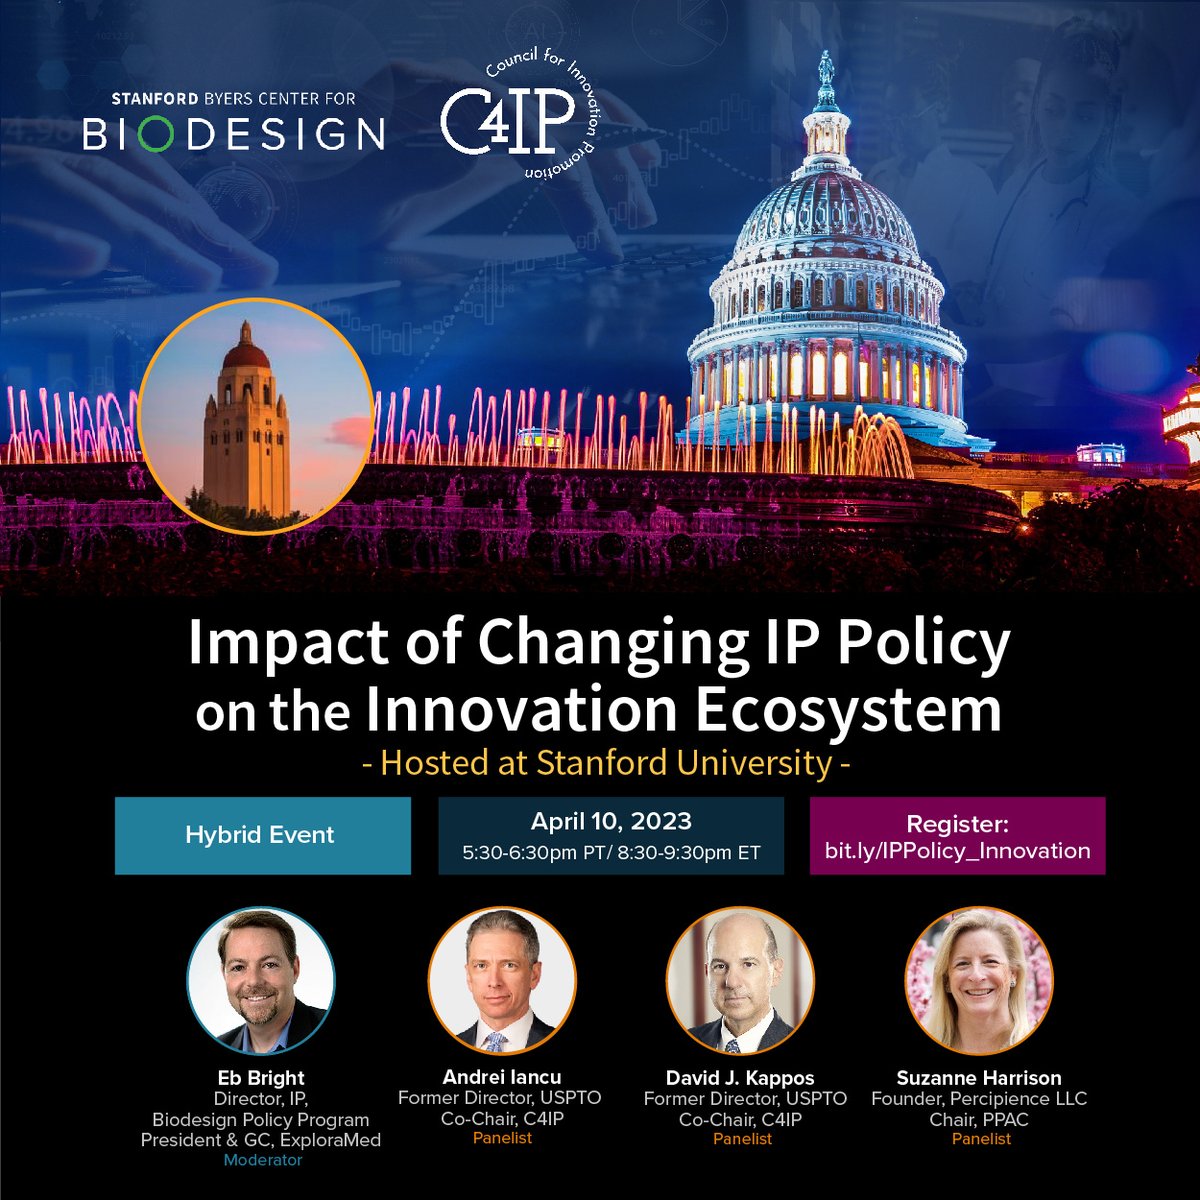 'If you care about innovation outcomes, you have to care about innovation incentives.' - David J. Kappos. Join the stream ow.ly/FAcJ50NFv7b @Council4IP @medicaldevices @FogartyInnov @nvca #StanfordBiodesignPolicyProgram #InnovationandIP